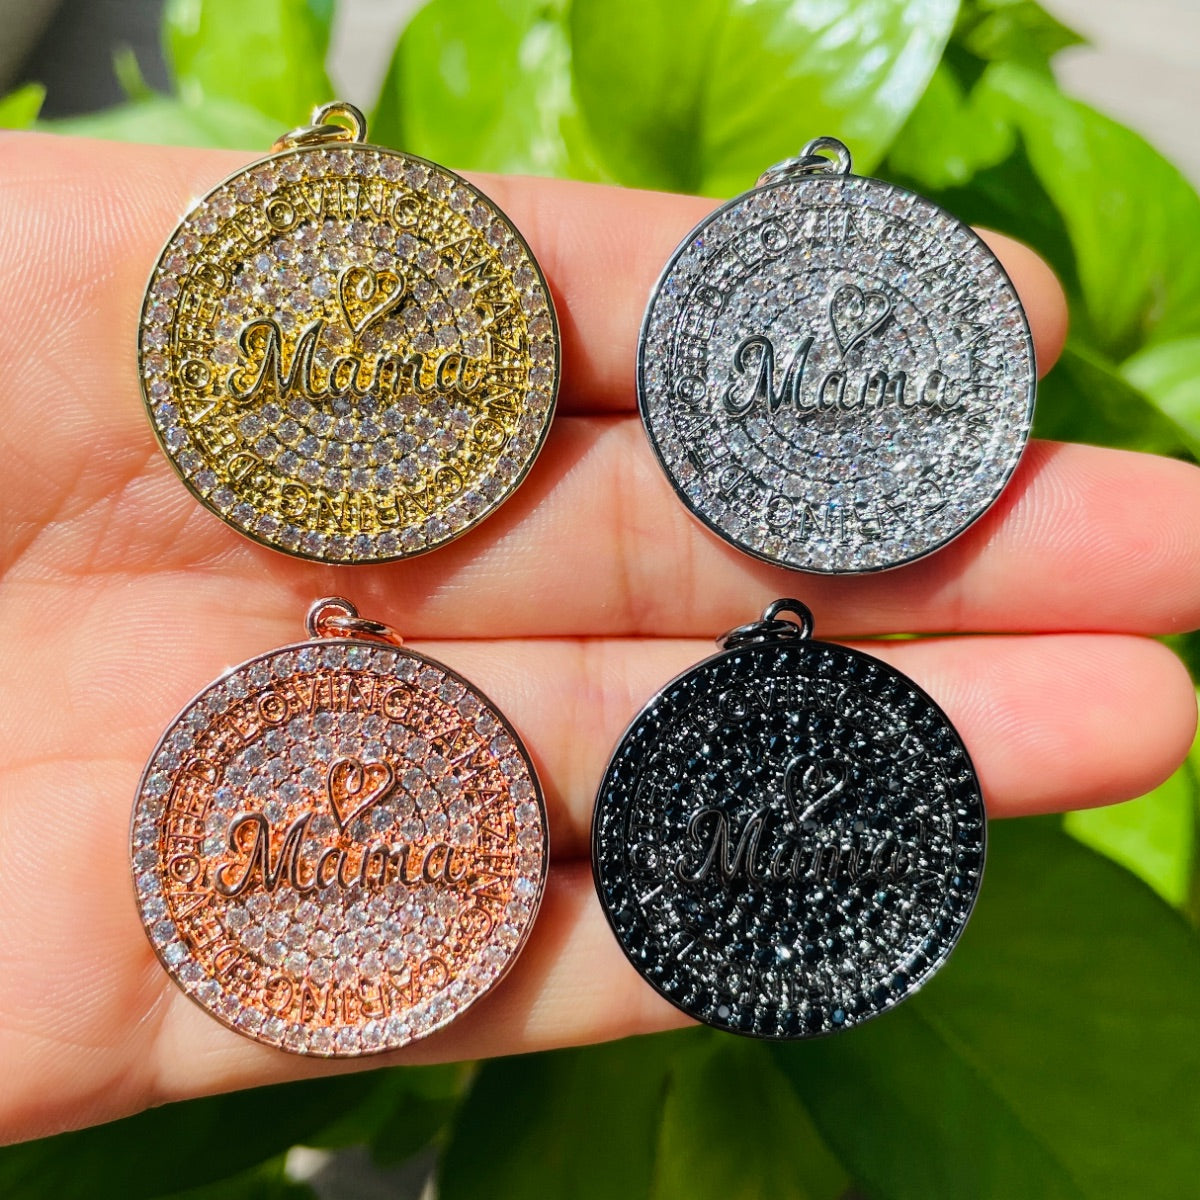 10pcs/lot 28mm CZ Pave Round Plate MAMA IS LOVING AMAZING CARING DEVOTED Quote Charms for Mother/Mom Mix Colors CZ Paved Charms Discs Mother's Day On Sale Charms Beads Beyond